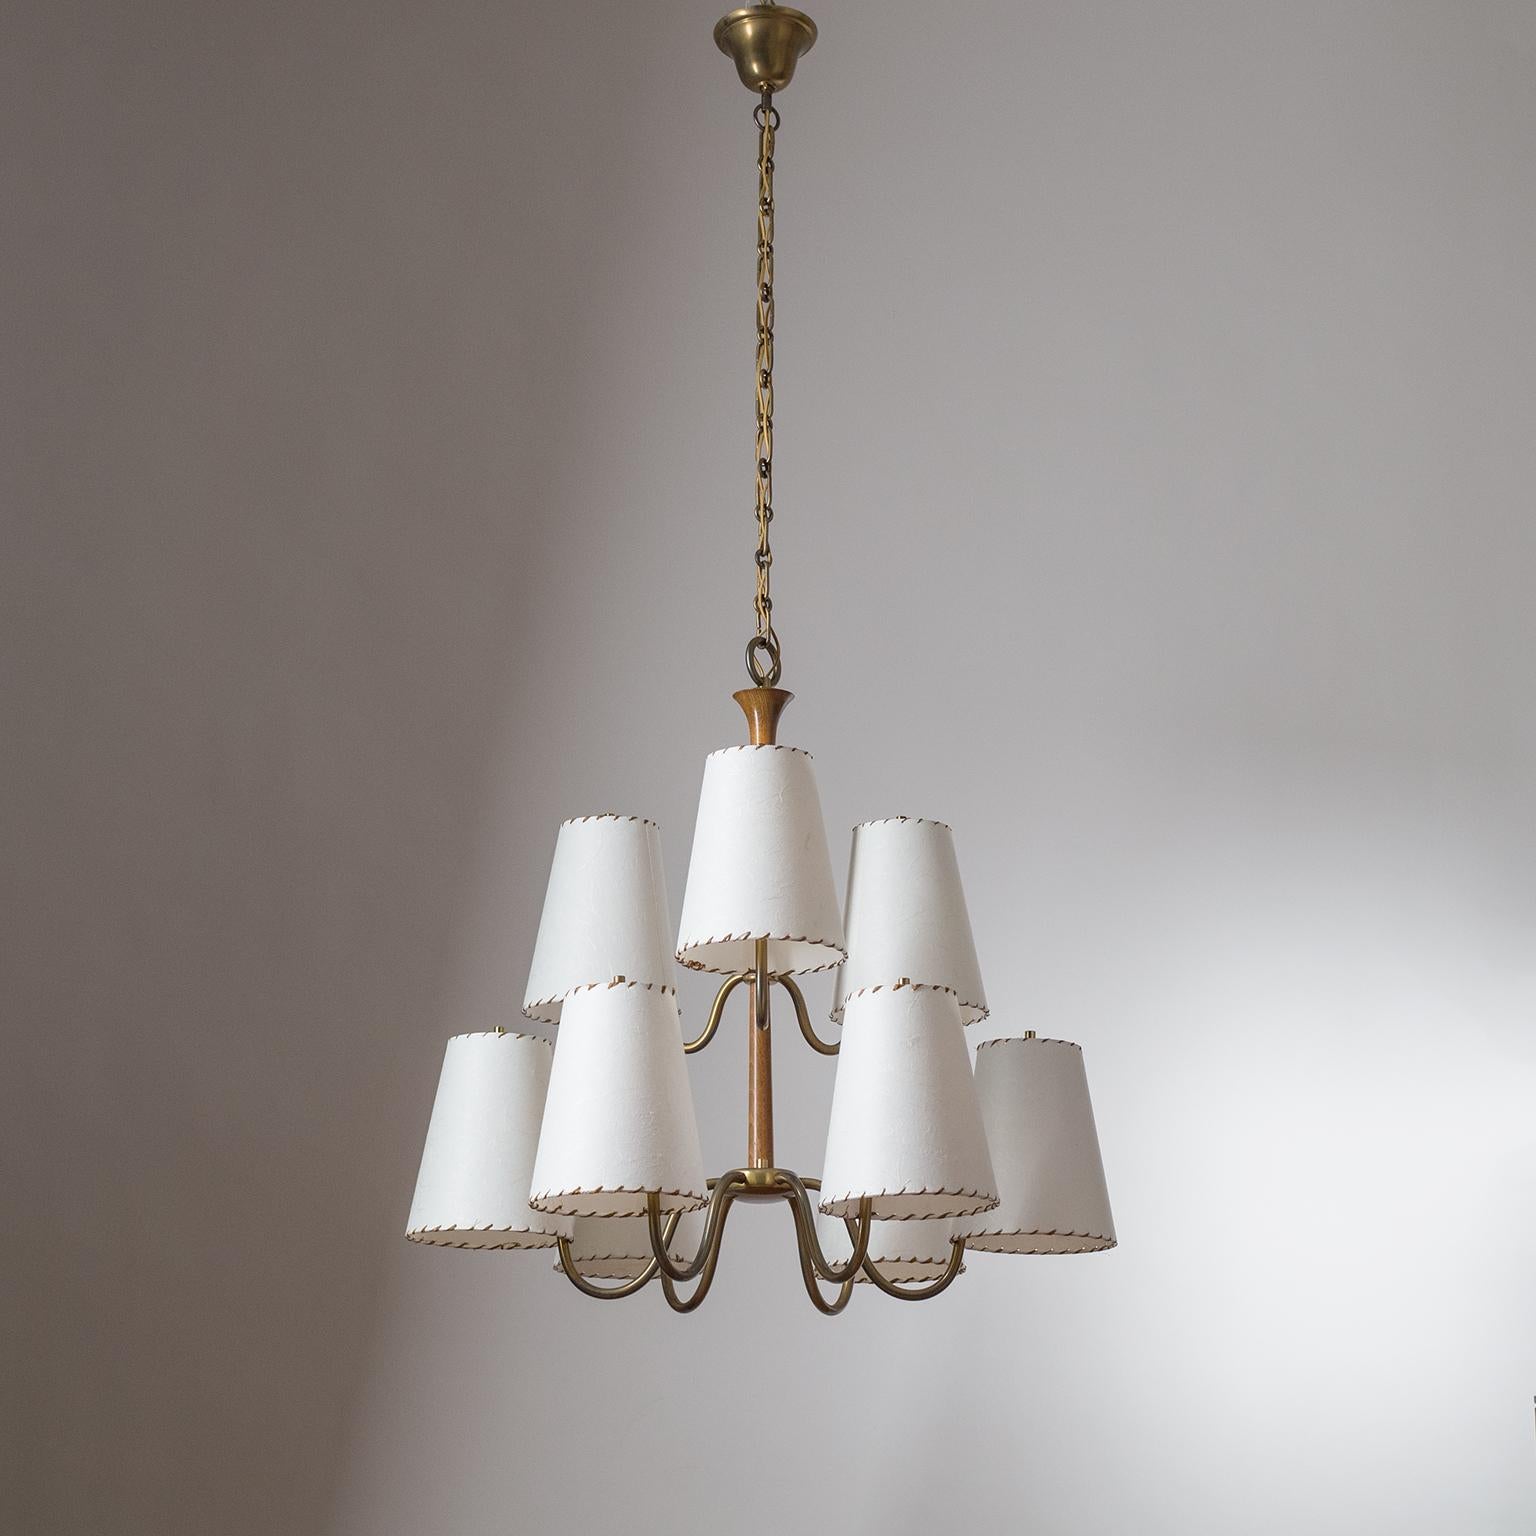 Large Austrian Chandelier, 1930s, Brass, Wood and Paper Shades 10